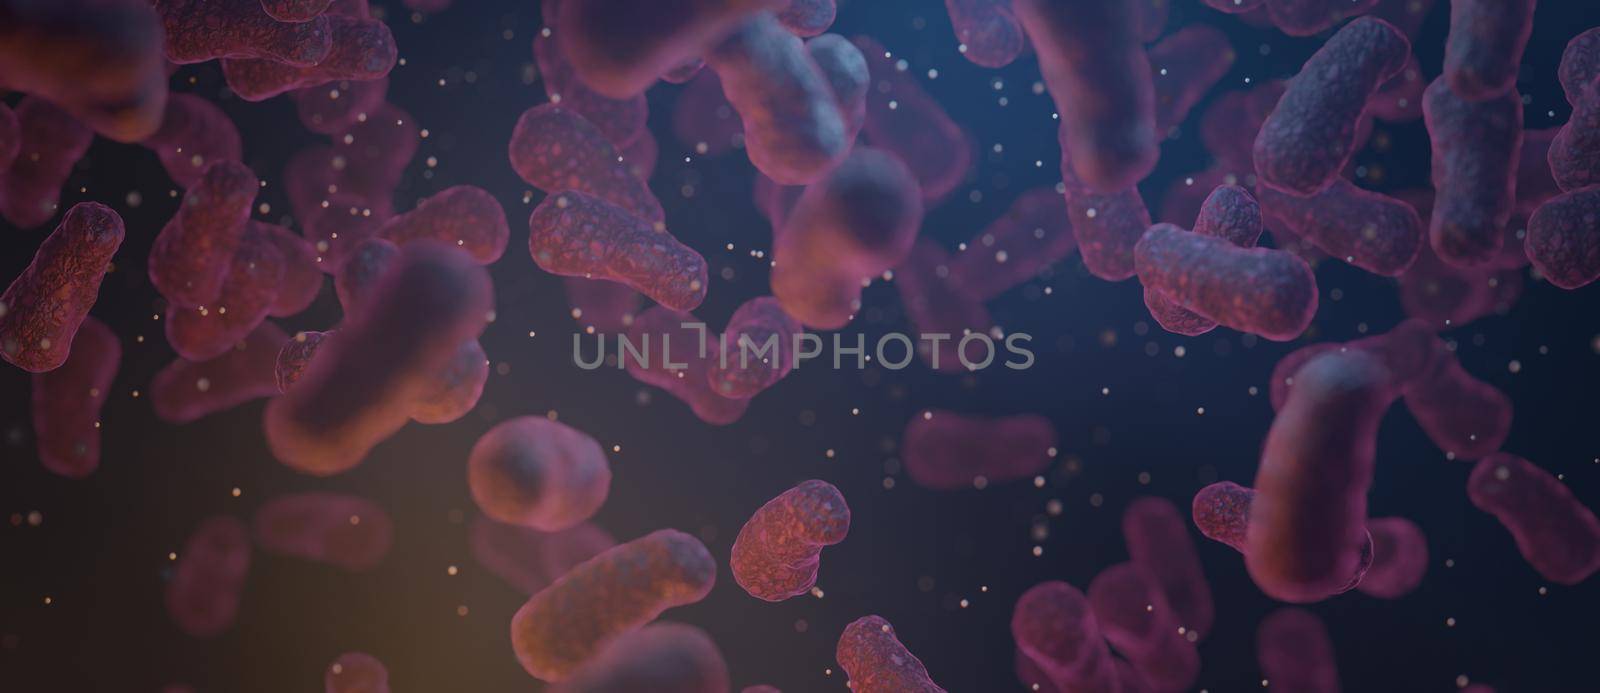 Virus bacteria cells background 3D Render by yay_lmrb